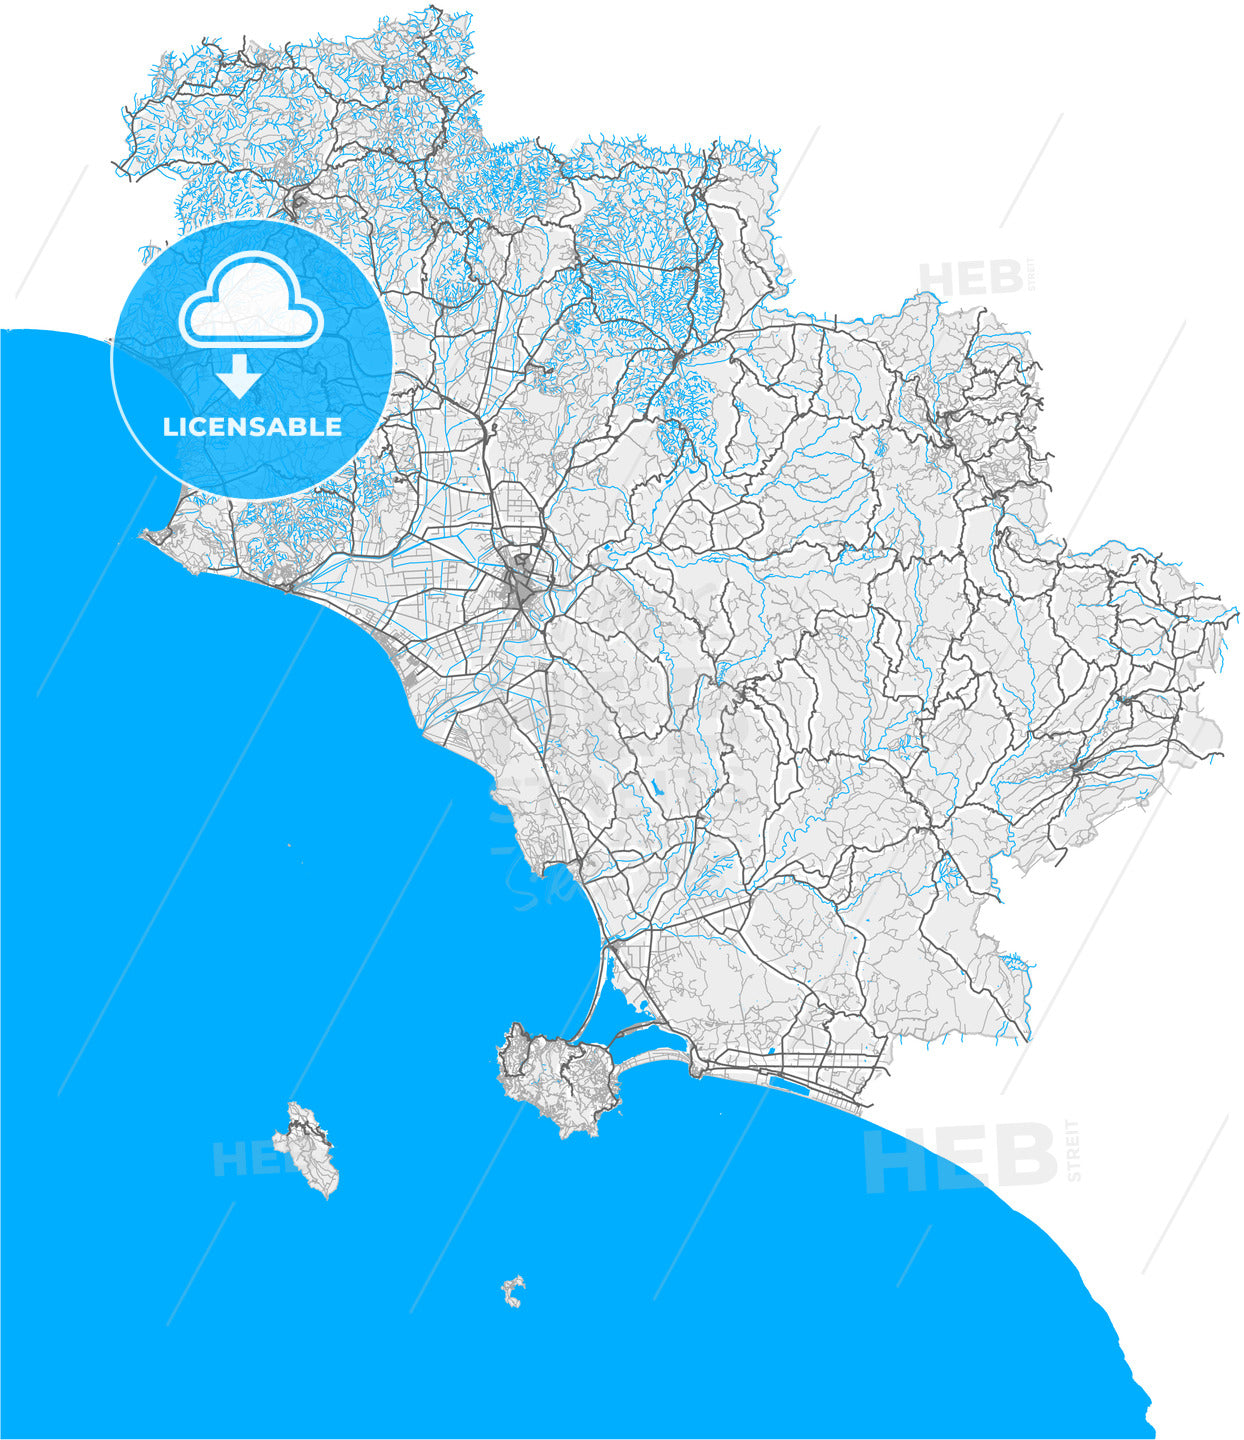 Grosseto, Tuscany, Italy, high quality vector map